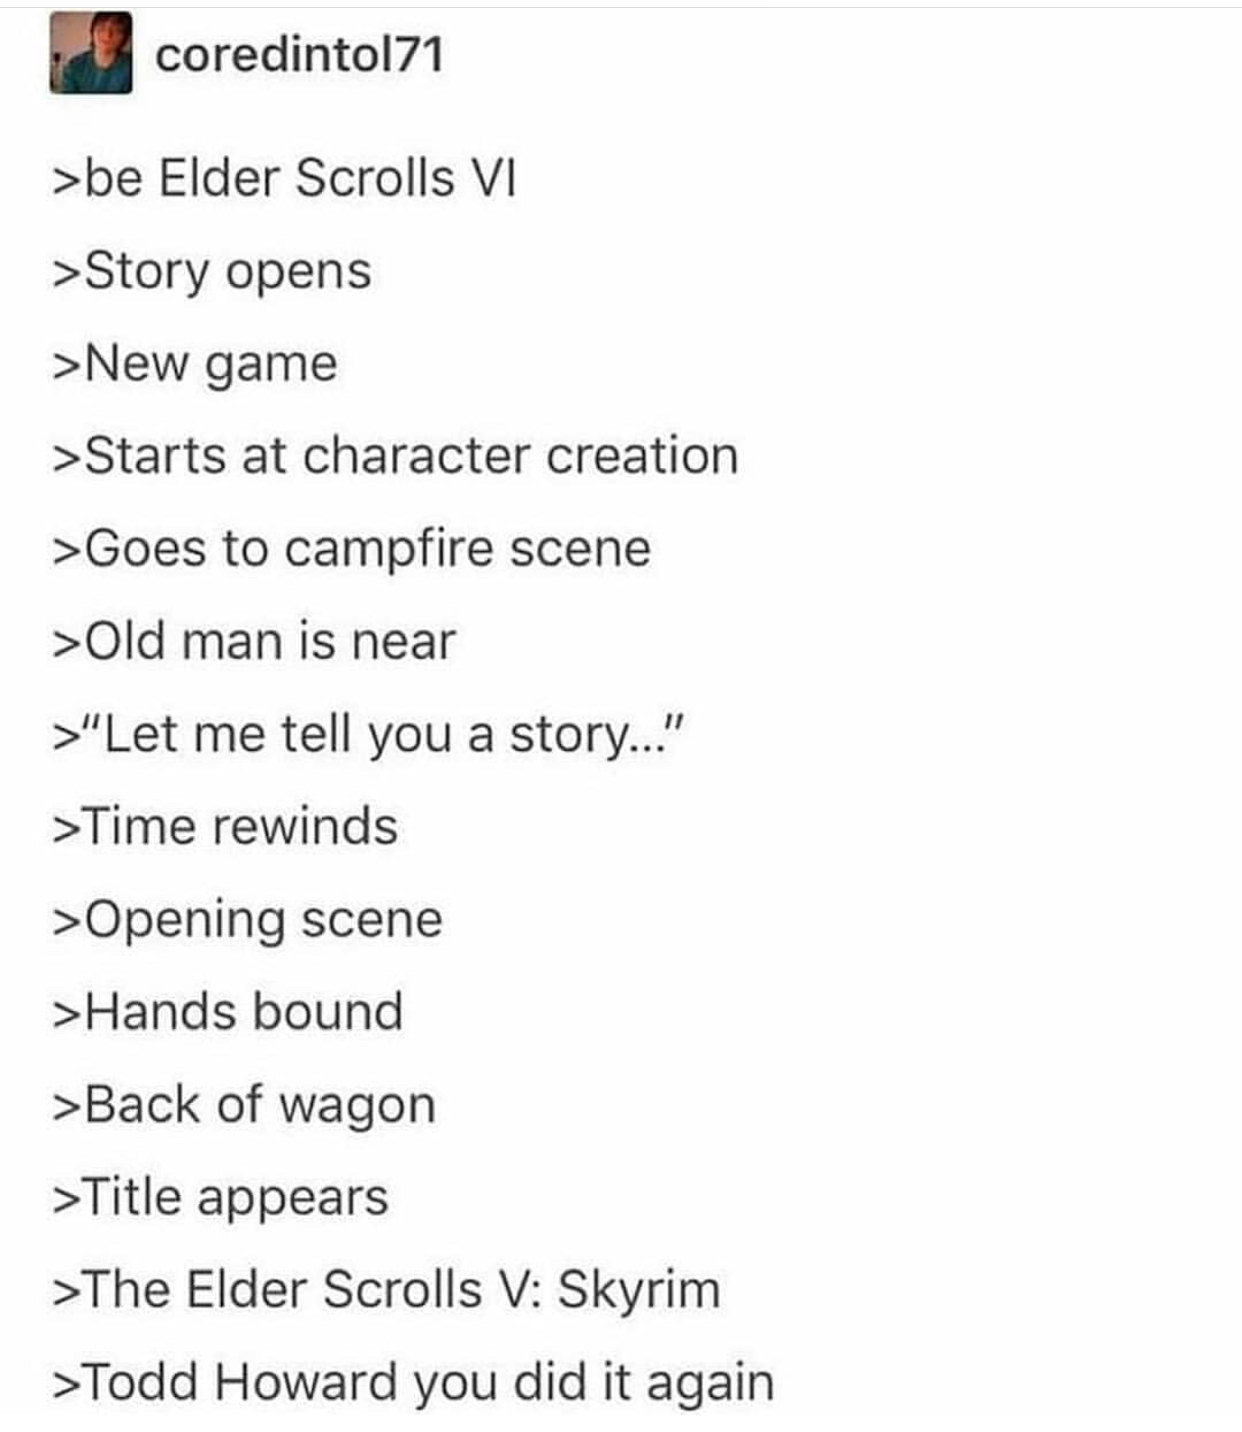 todd you did it again meme - coredintol71 >be Elder Scrolls Vi >Story opens >New game >Starts at character creation >Goes to campfire scene >Old man is near >"Let me tell you a story..." >Time rewinds >Opening scene >Hands bound >Back of wagon >Title appe